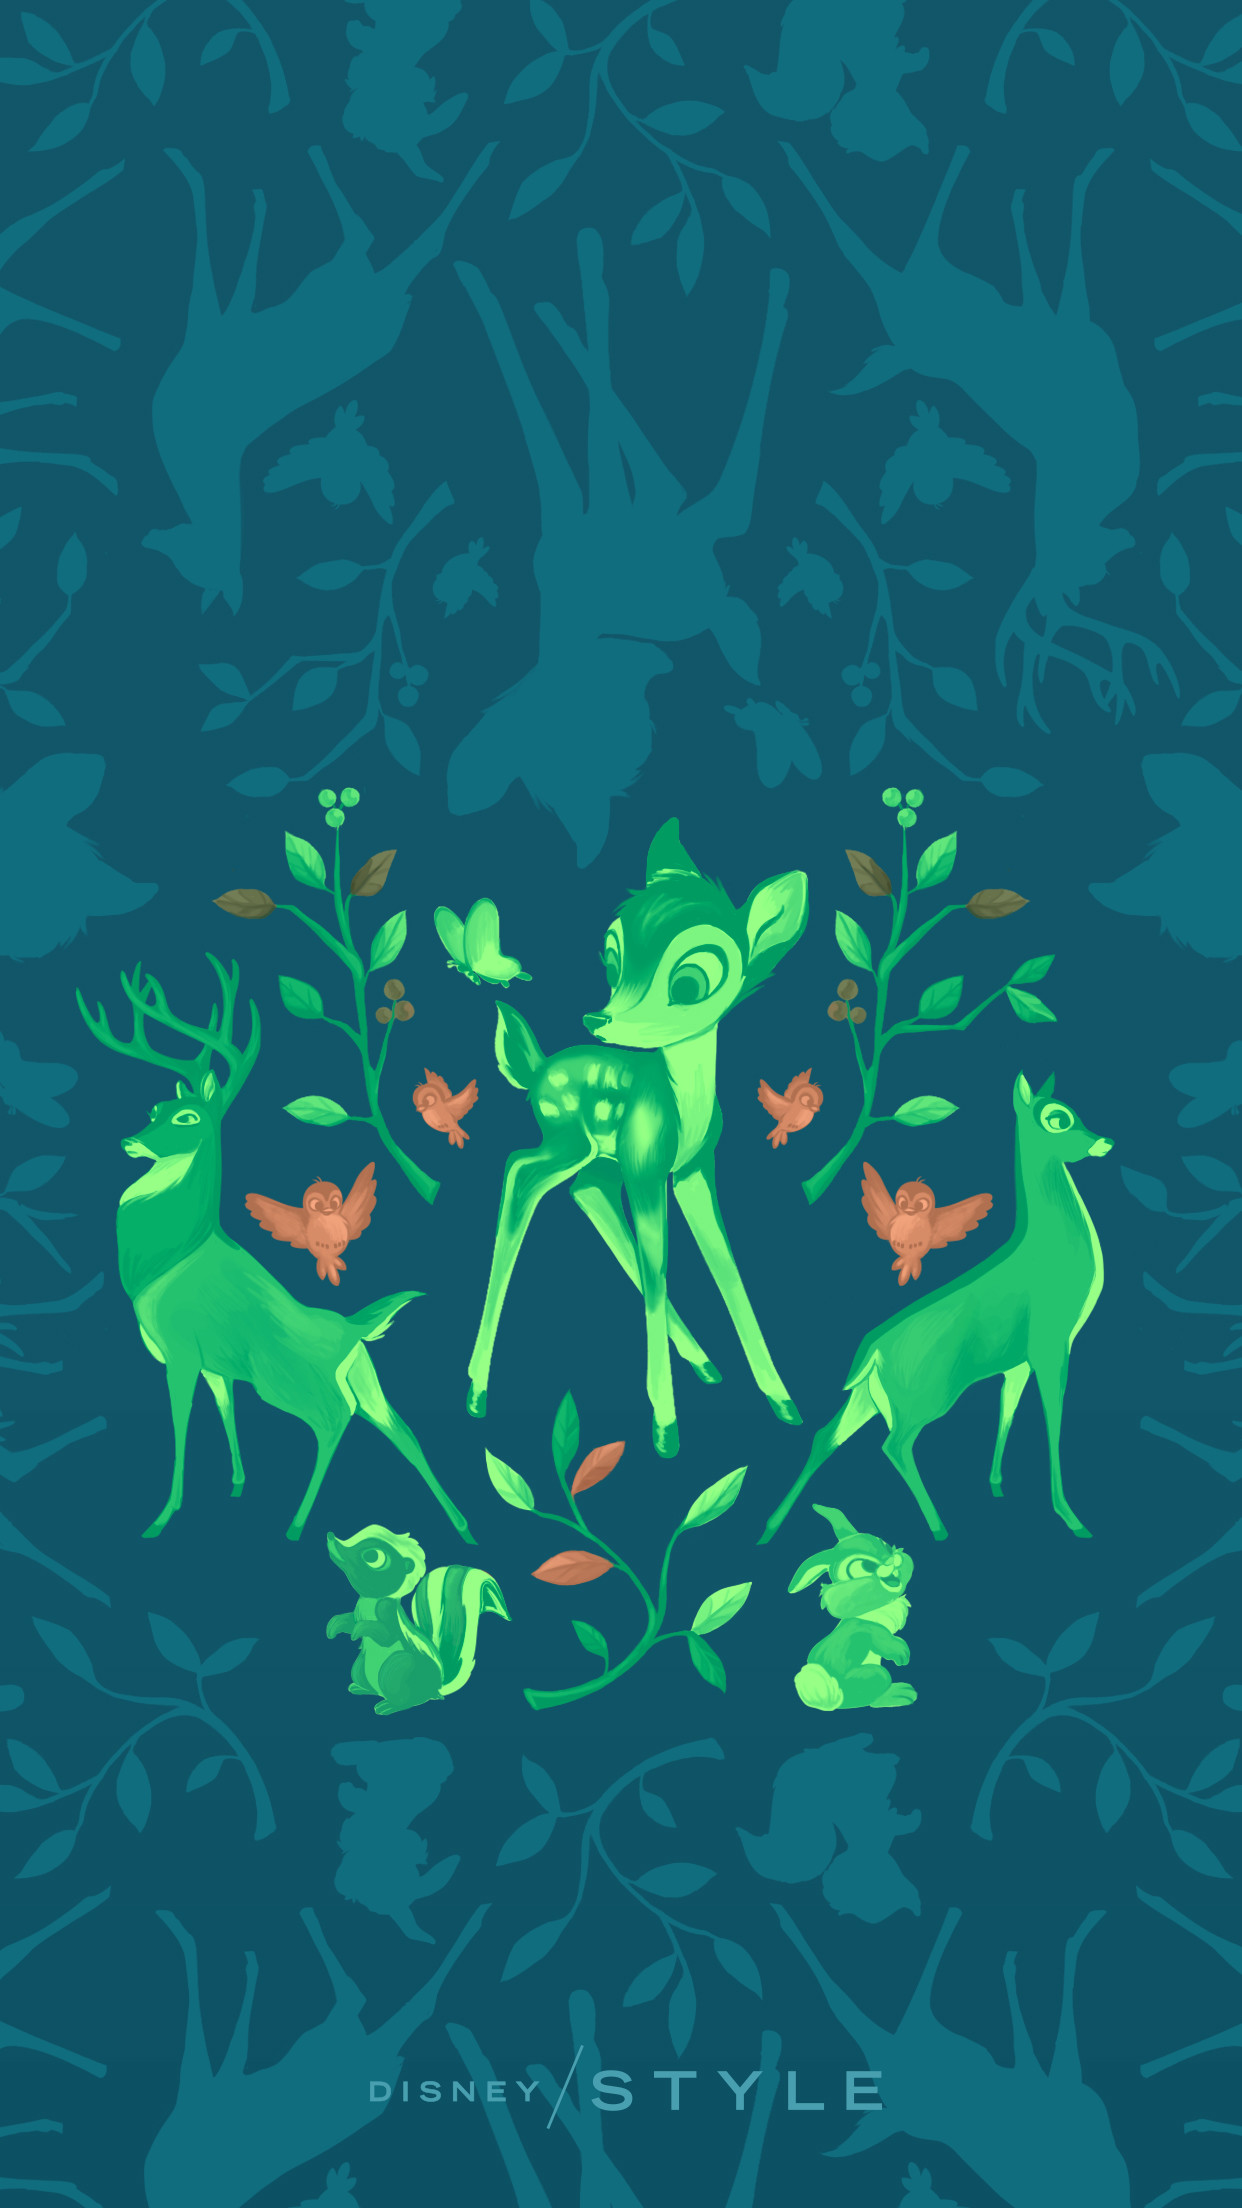 Style animalwallpaper bambi. Would you like to see other Disney phone backgrounds